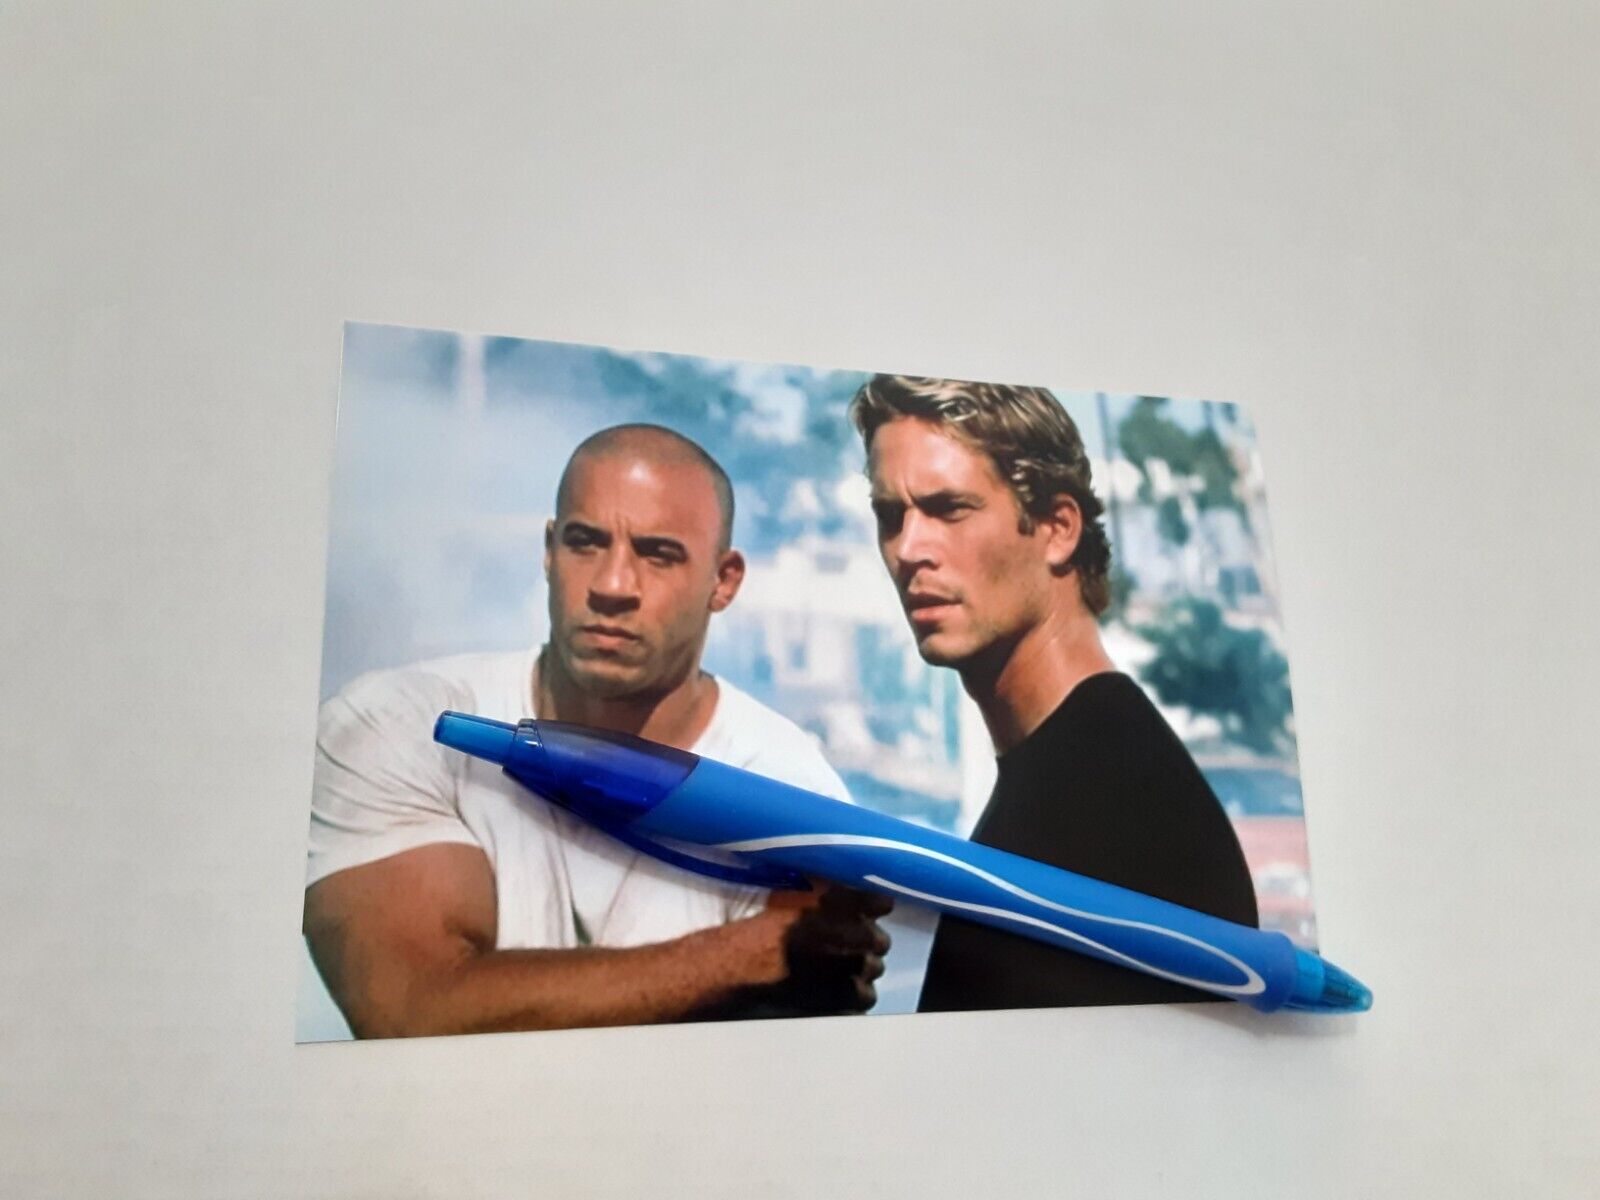 VIN DIESEL & PAUL WALKER, THE FAST & THE FURIOUS, GLOSSY COLOR, 4X6 PHOTO, NEW 